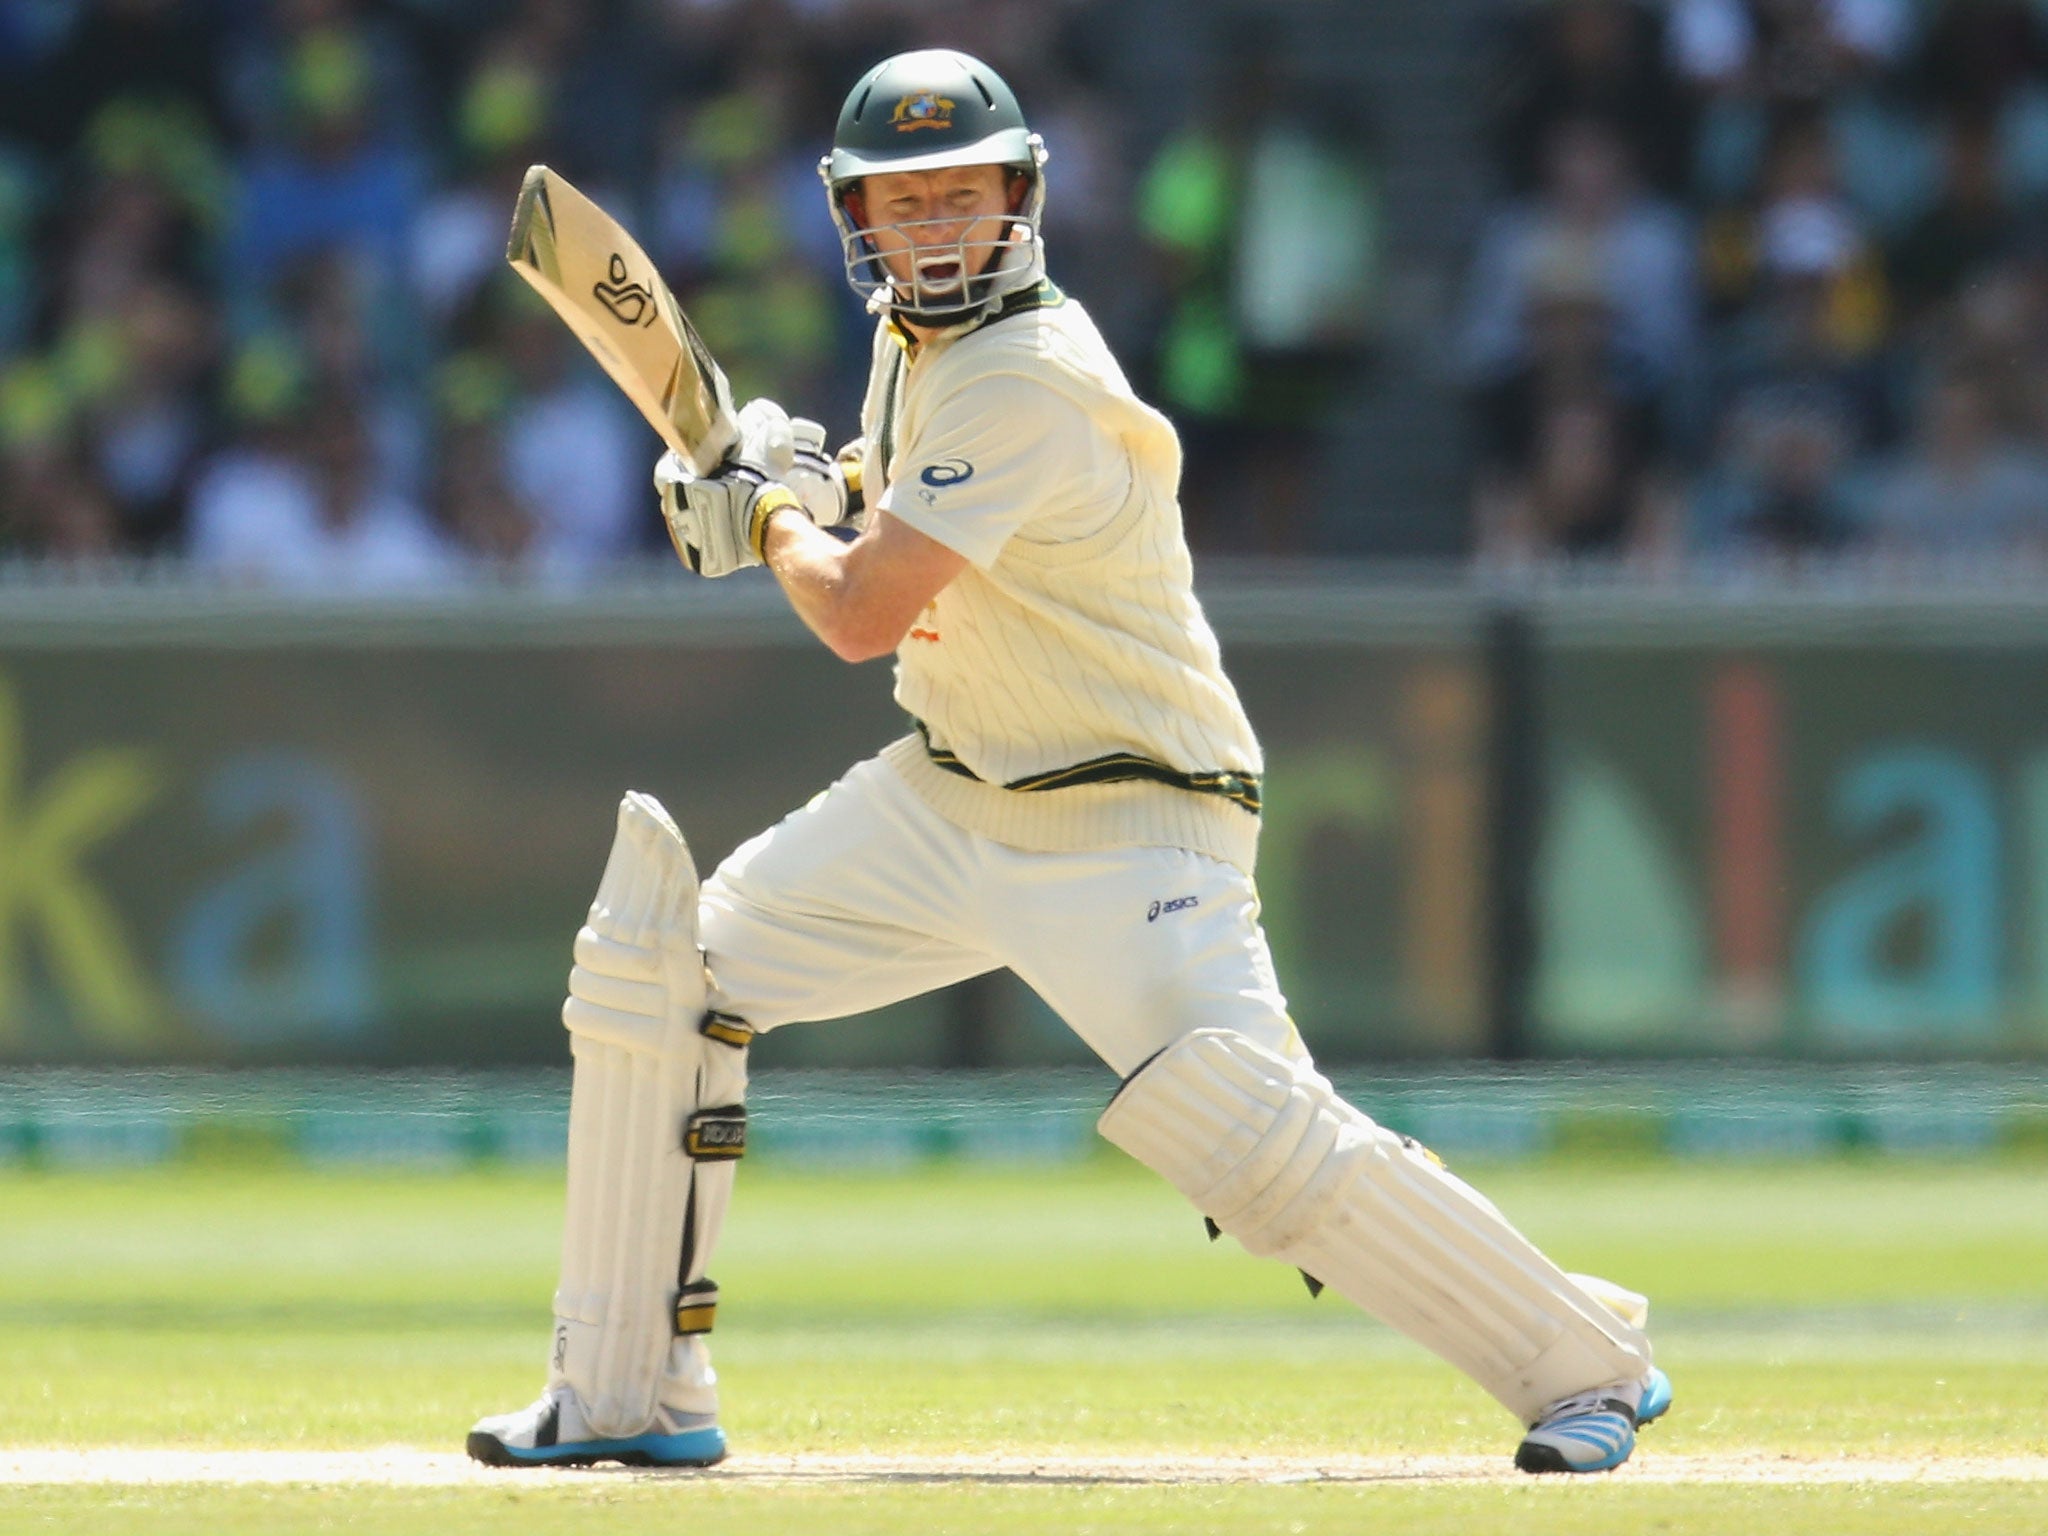 Chris Rogers of Australia bats during day four of the Fourth Ashes Test Match between Australia and England